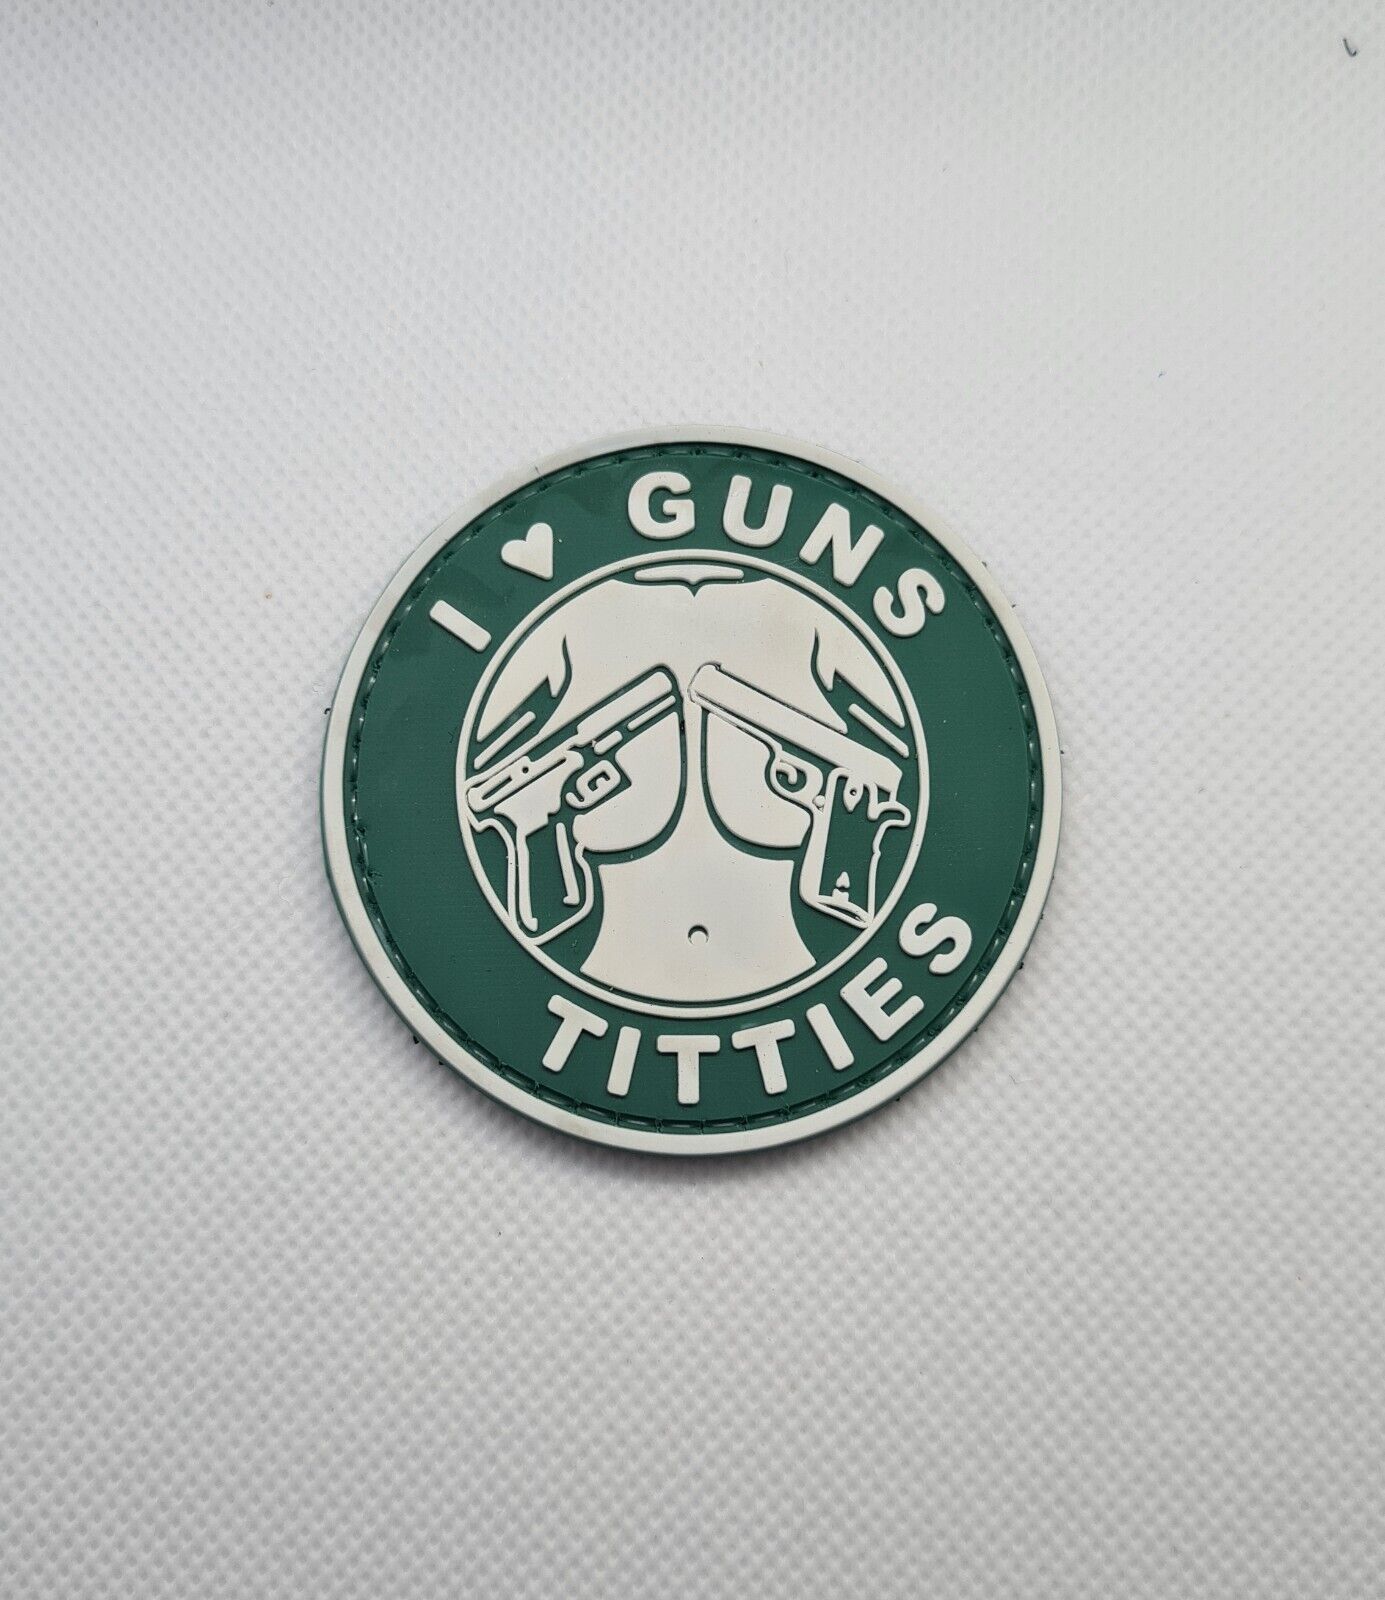 Love Guns and Titties 3D PVC Tactical Morale Patch – Hook Backed